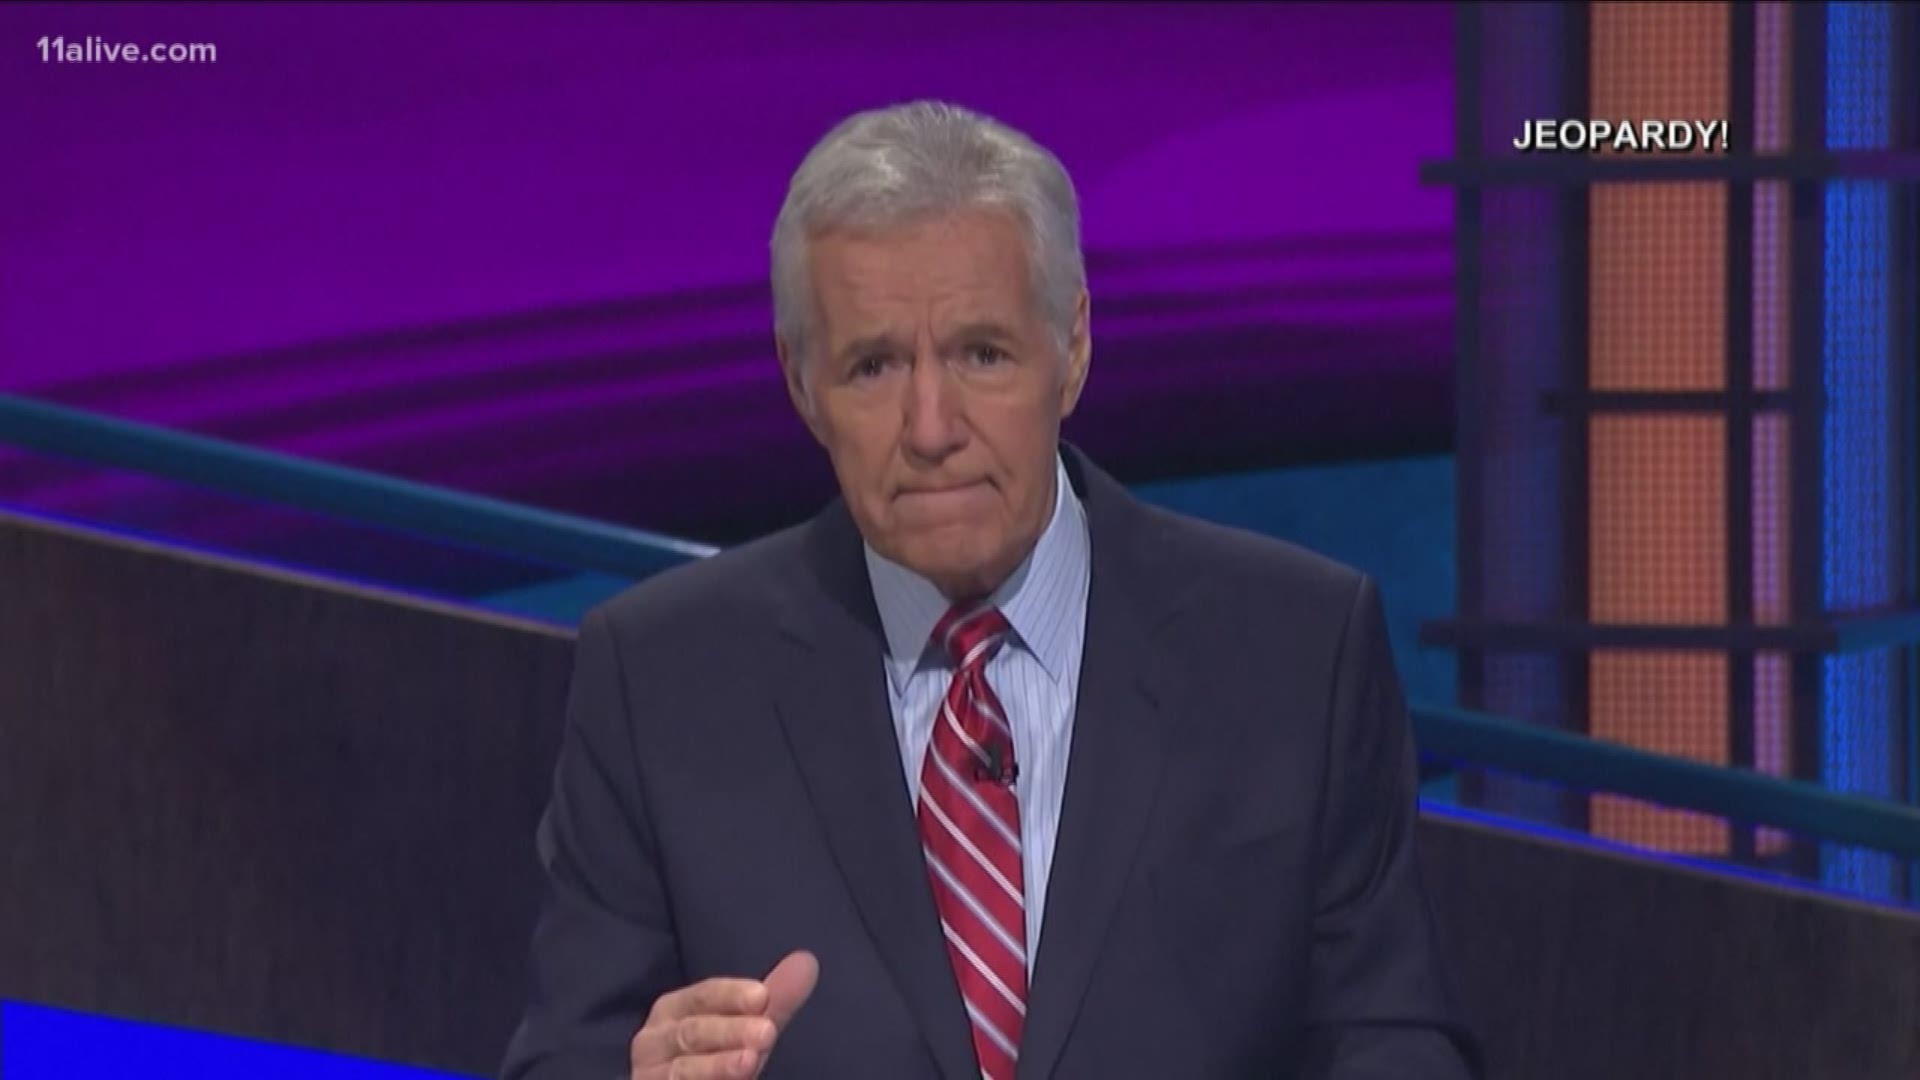 Alex Trebek joked he has to beat his cancer diagnosis because he's under contract to host 'Jeopardy!' for three more years.